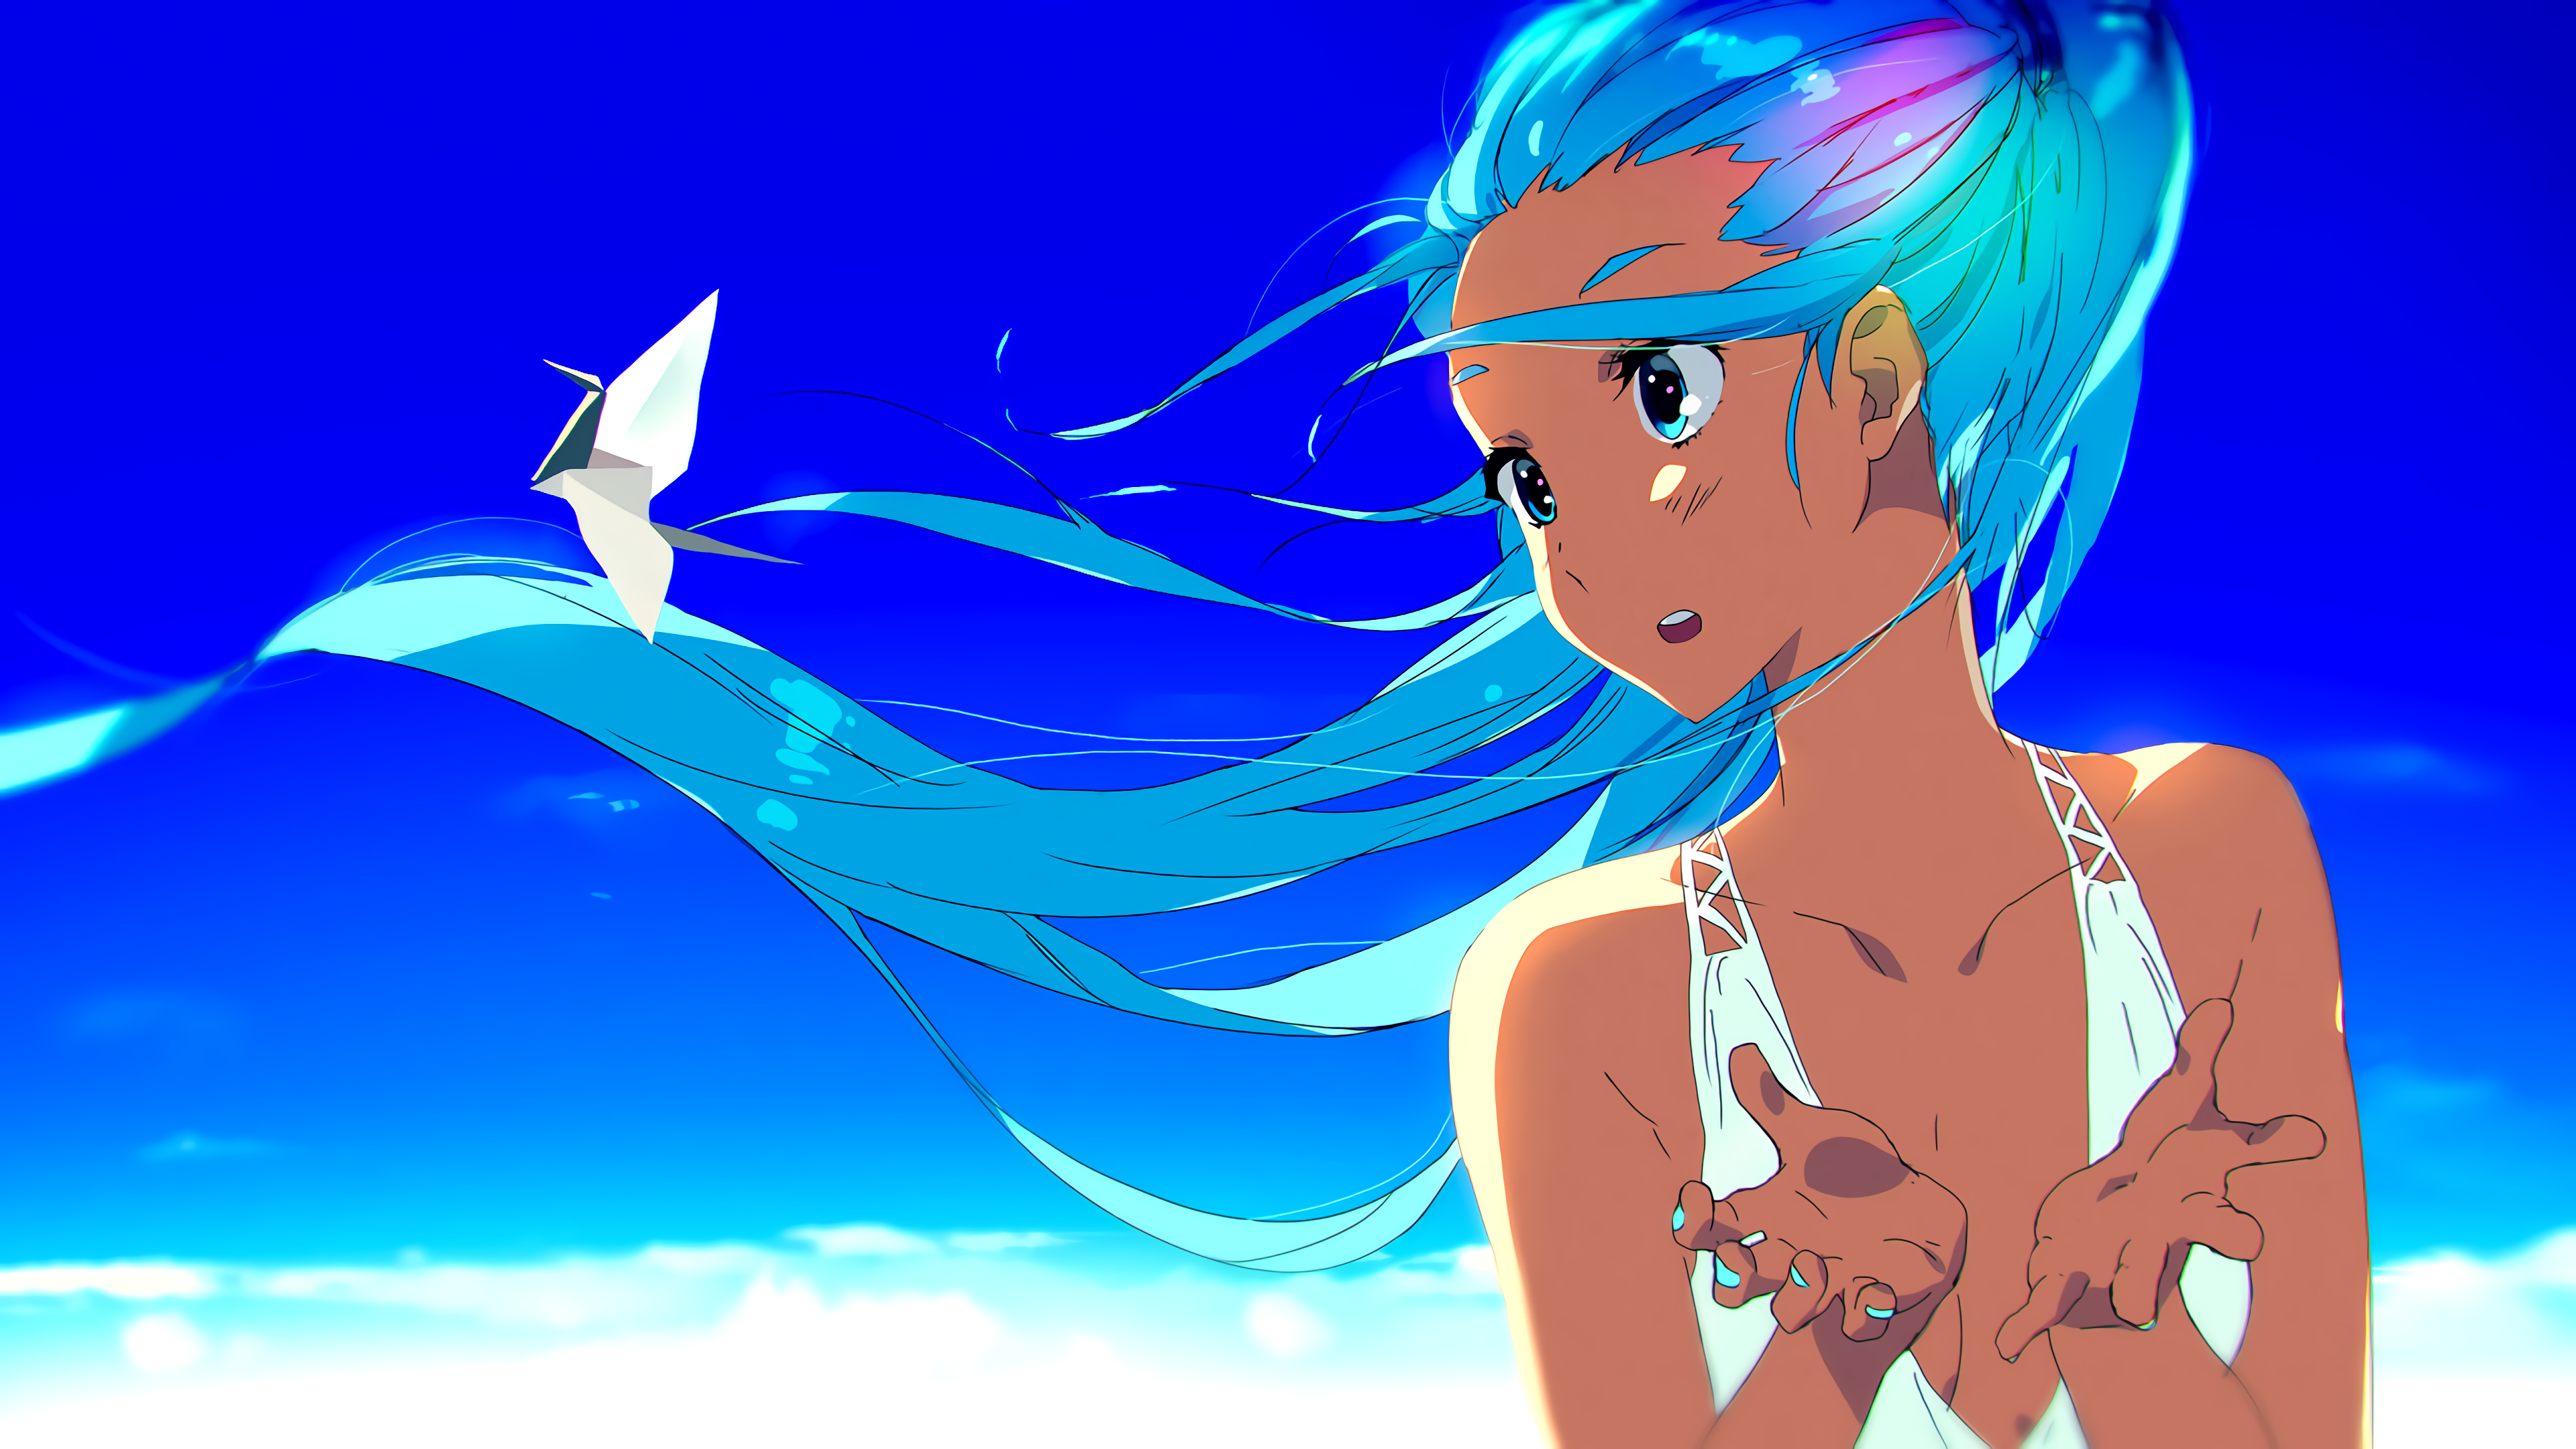 Anime 3840x2160 Tom Skender anime girls anime DeviantArt face long hair sky hair blowing in the wind wind blue hair blue eyes looking away open mouth blue nails ponytail origami